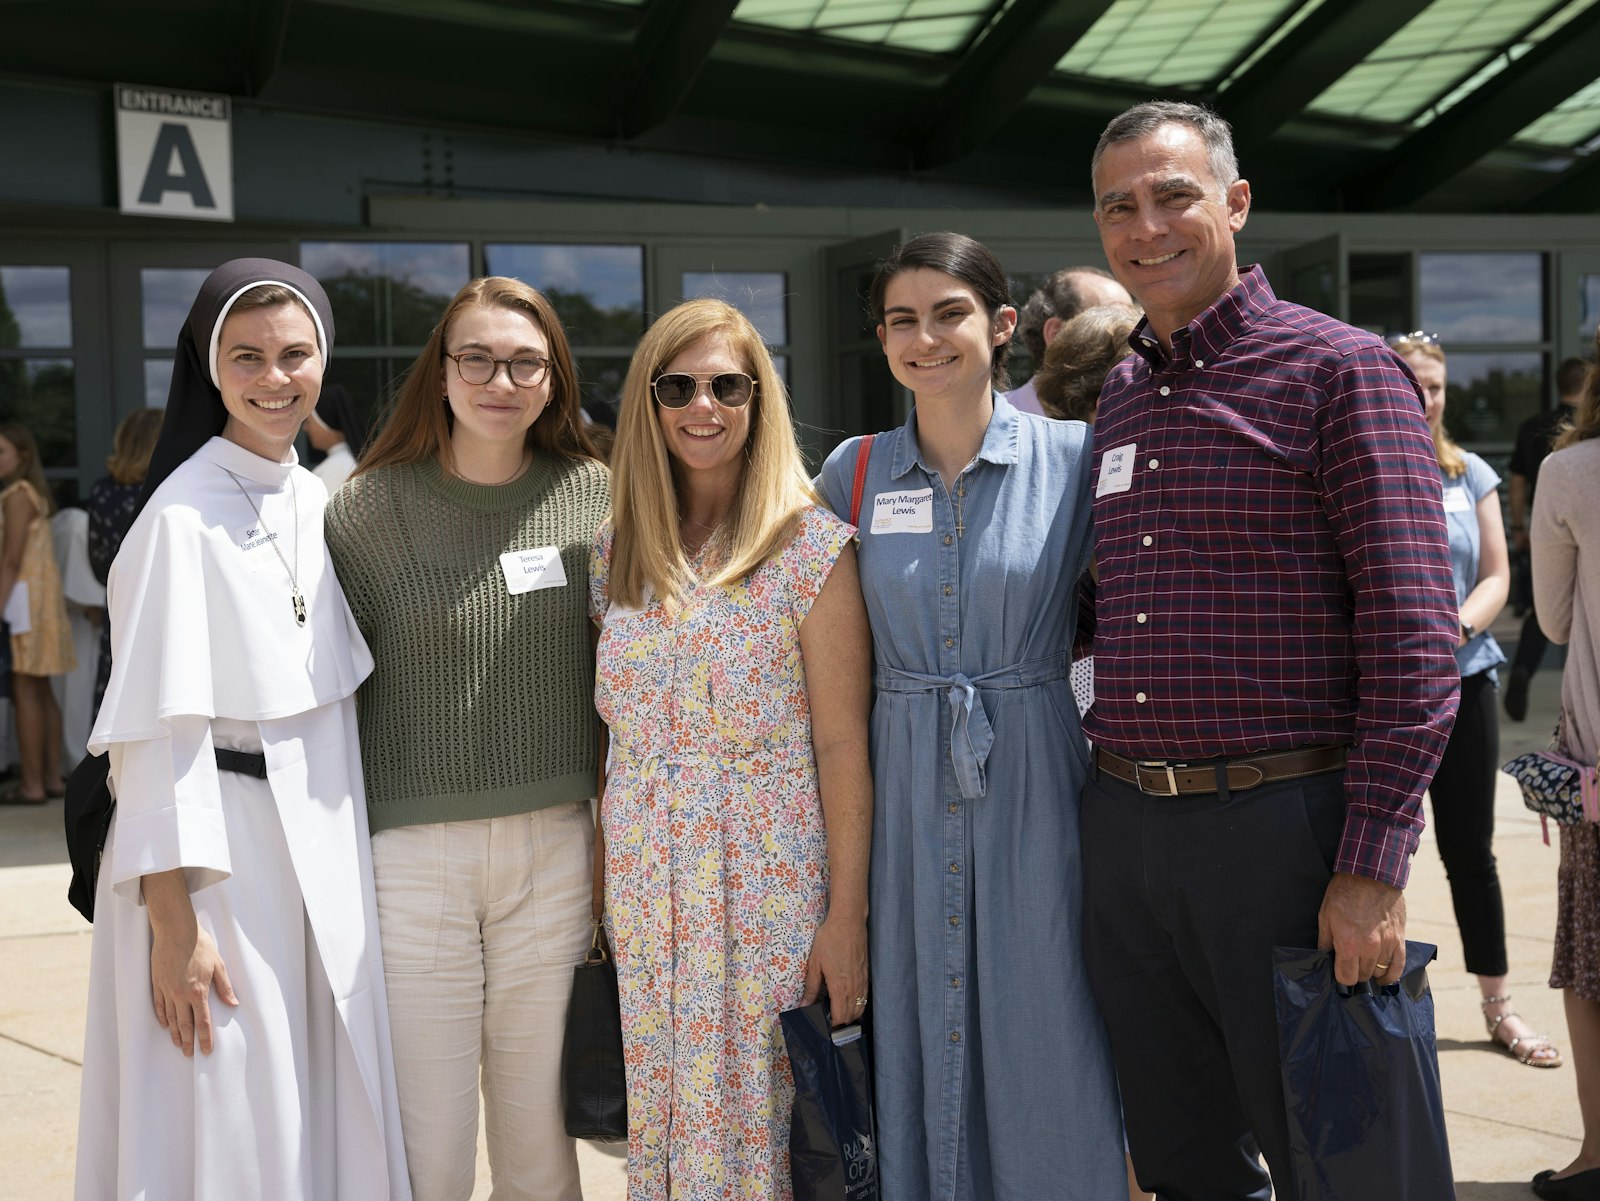 Sr. Marie Jeanette, OP, is pictured with her parents Craig and Kathleen Lewis and two of her sisters.  The Lewises flew in from North Carolina for the celebration.